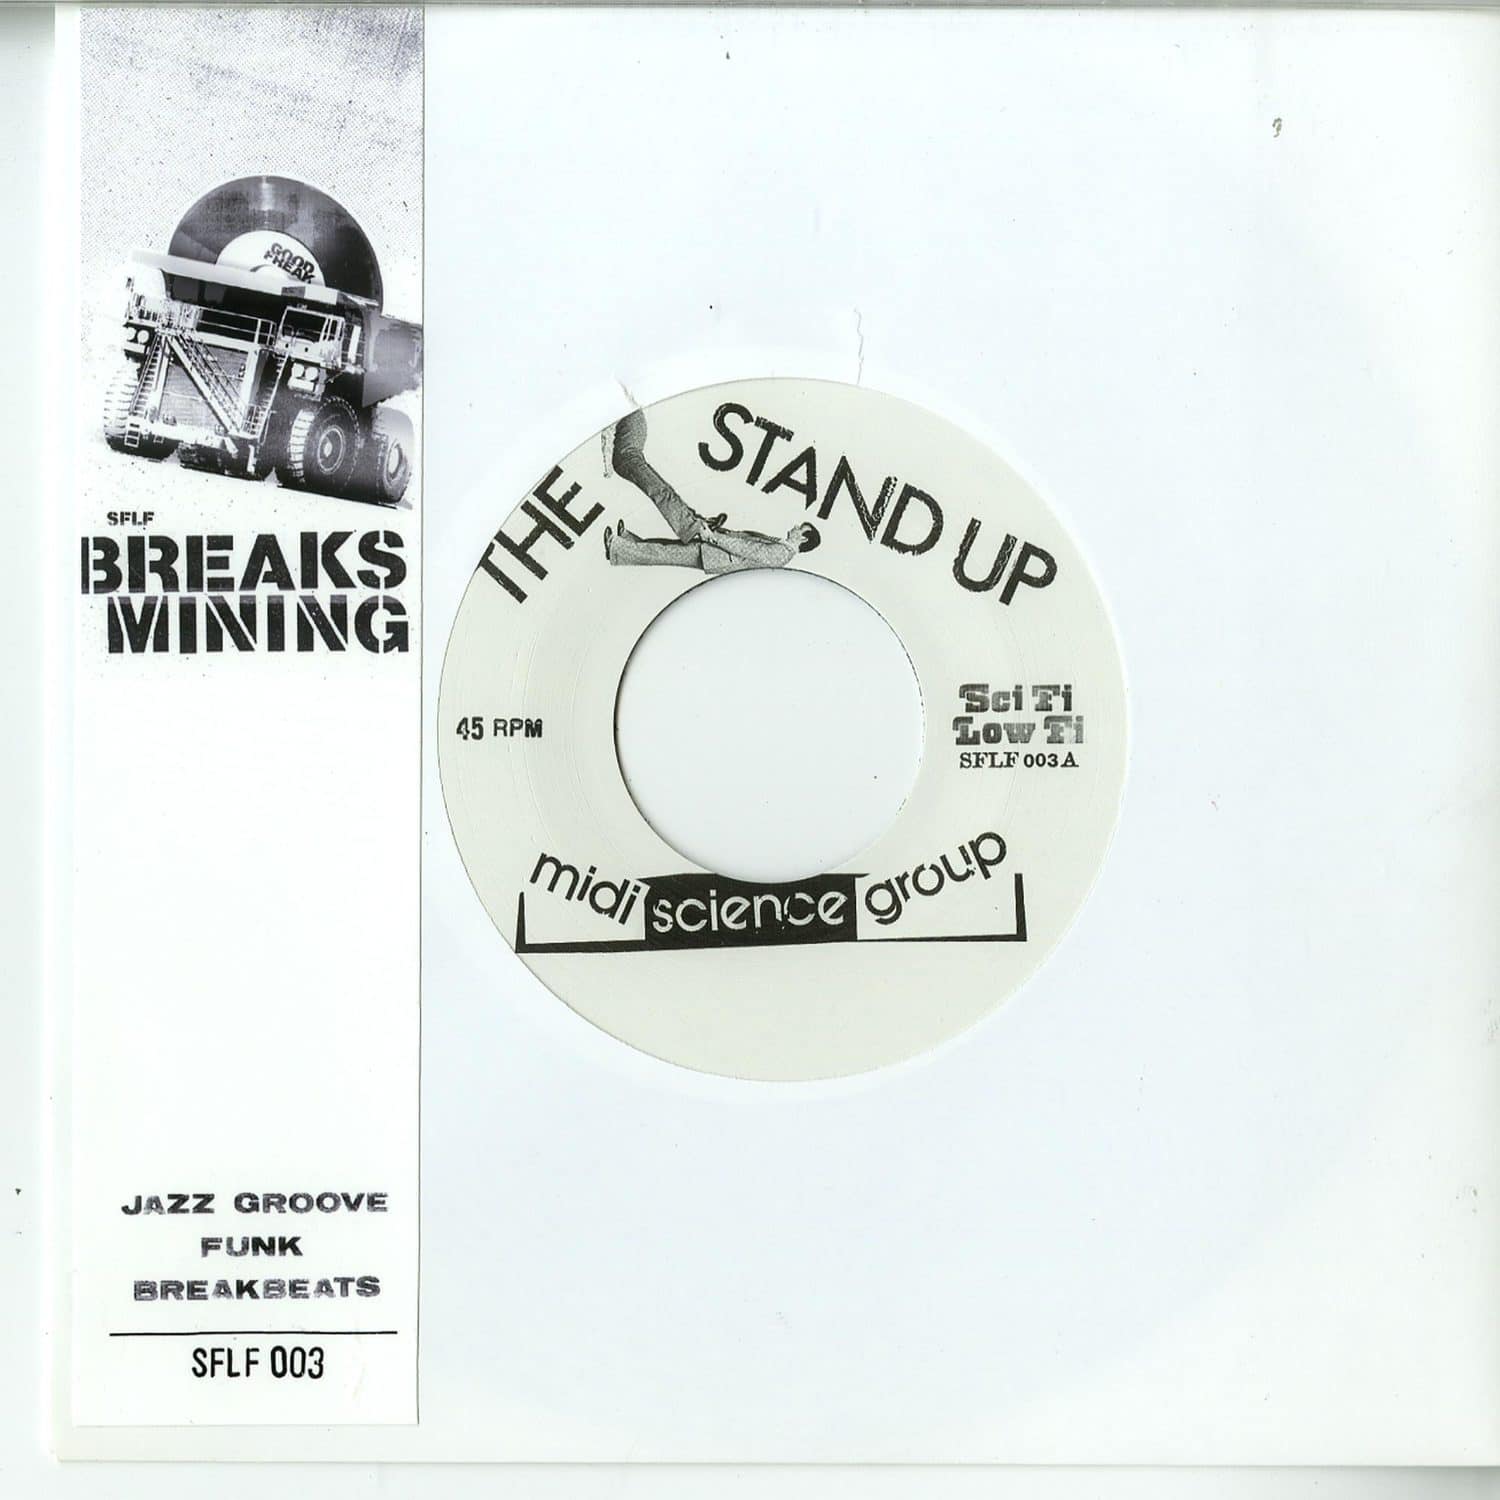 Midi Science Group - THE STAND UP / GOOD FREAK